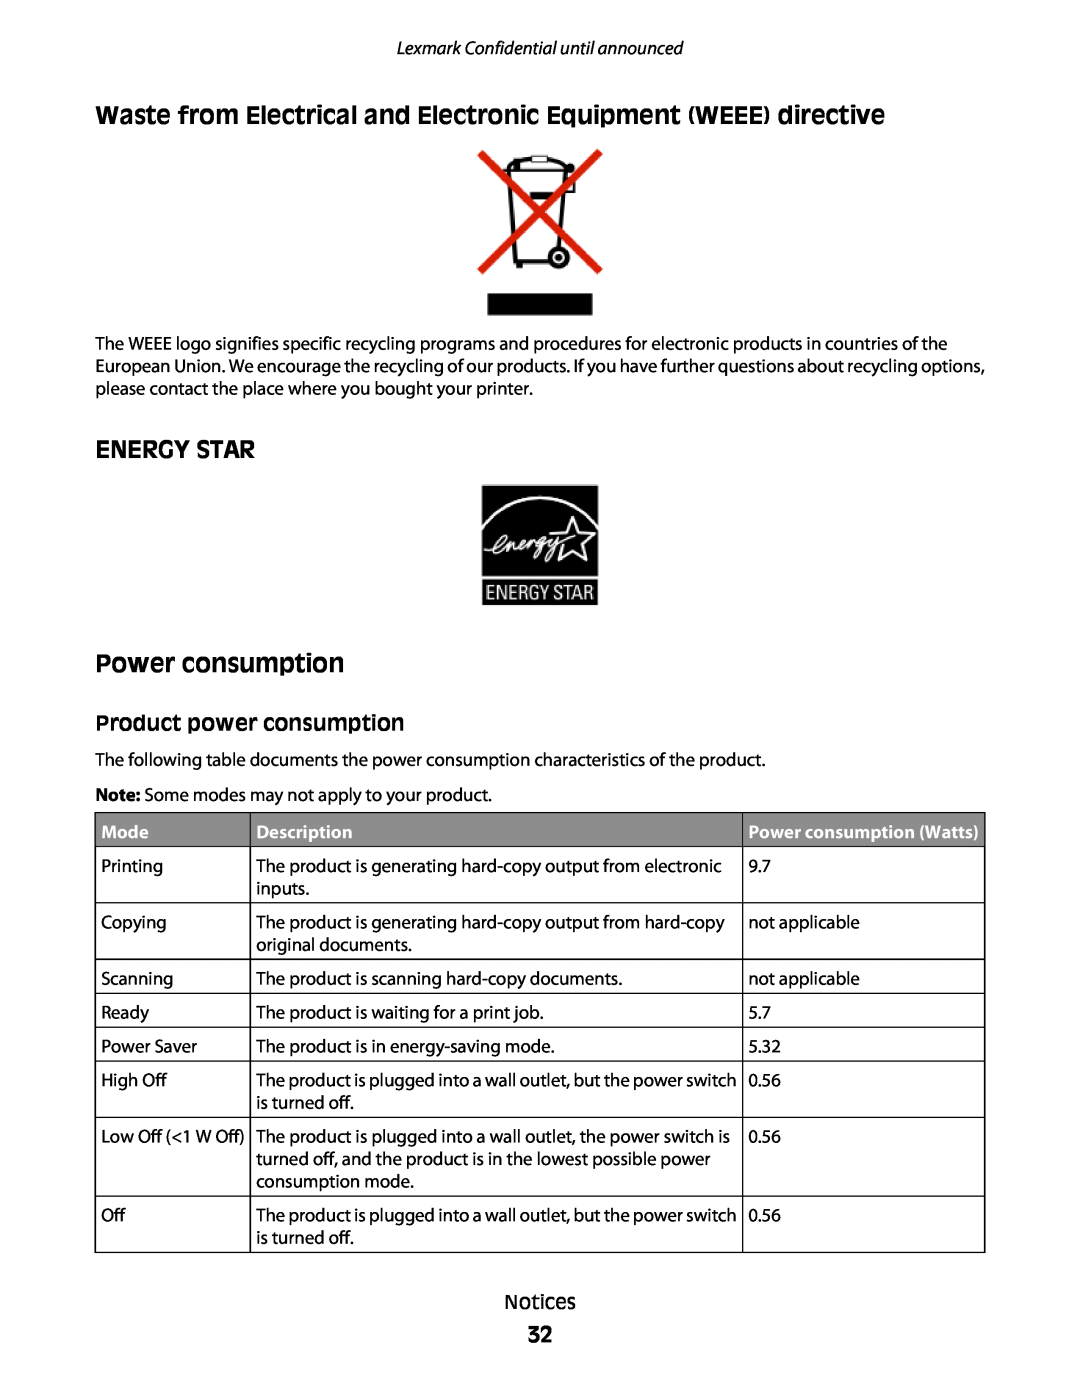 Lexmark P200 manual Waste from Electrical and Electronic Equipment WEEE directive, ENERGY STAR Power consumption, Mode 